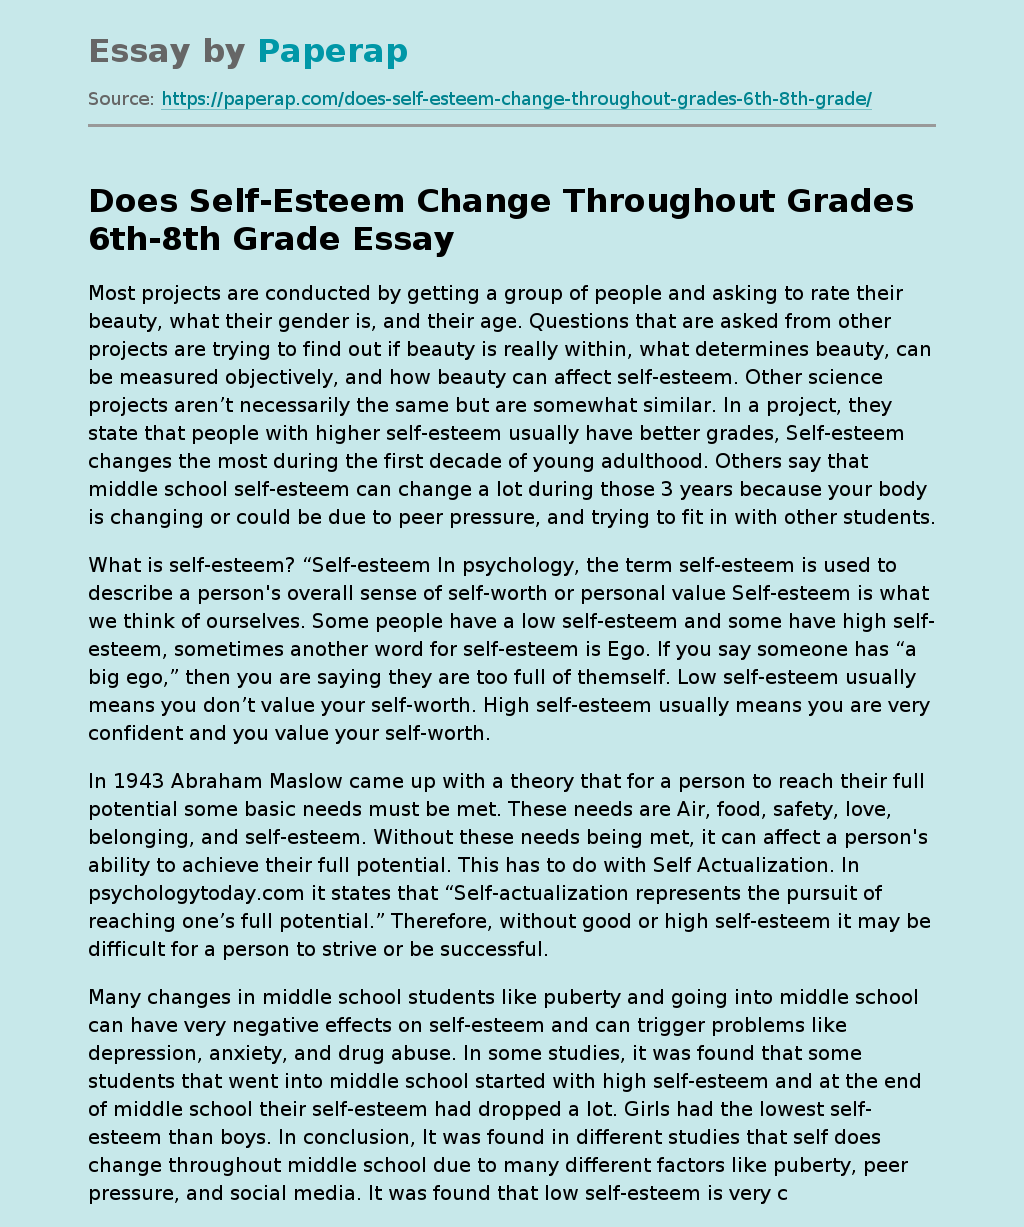 Does Self-Esteem Change Throughout Grades 6th-8th Grade